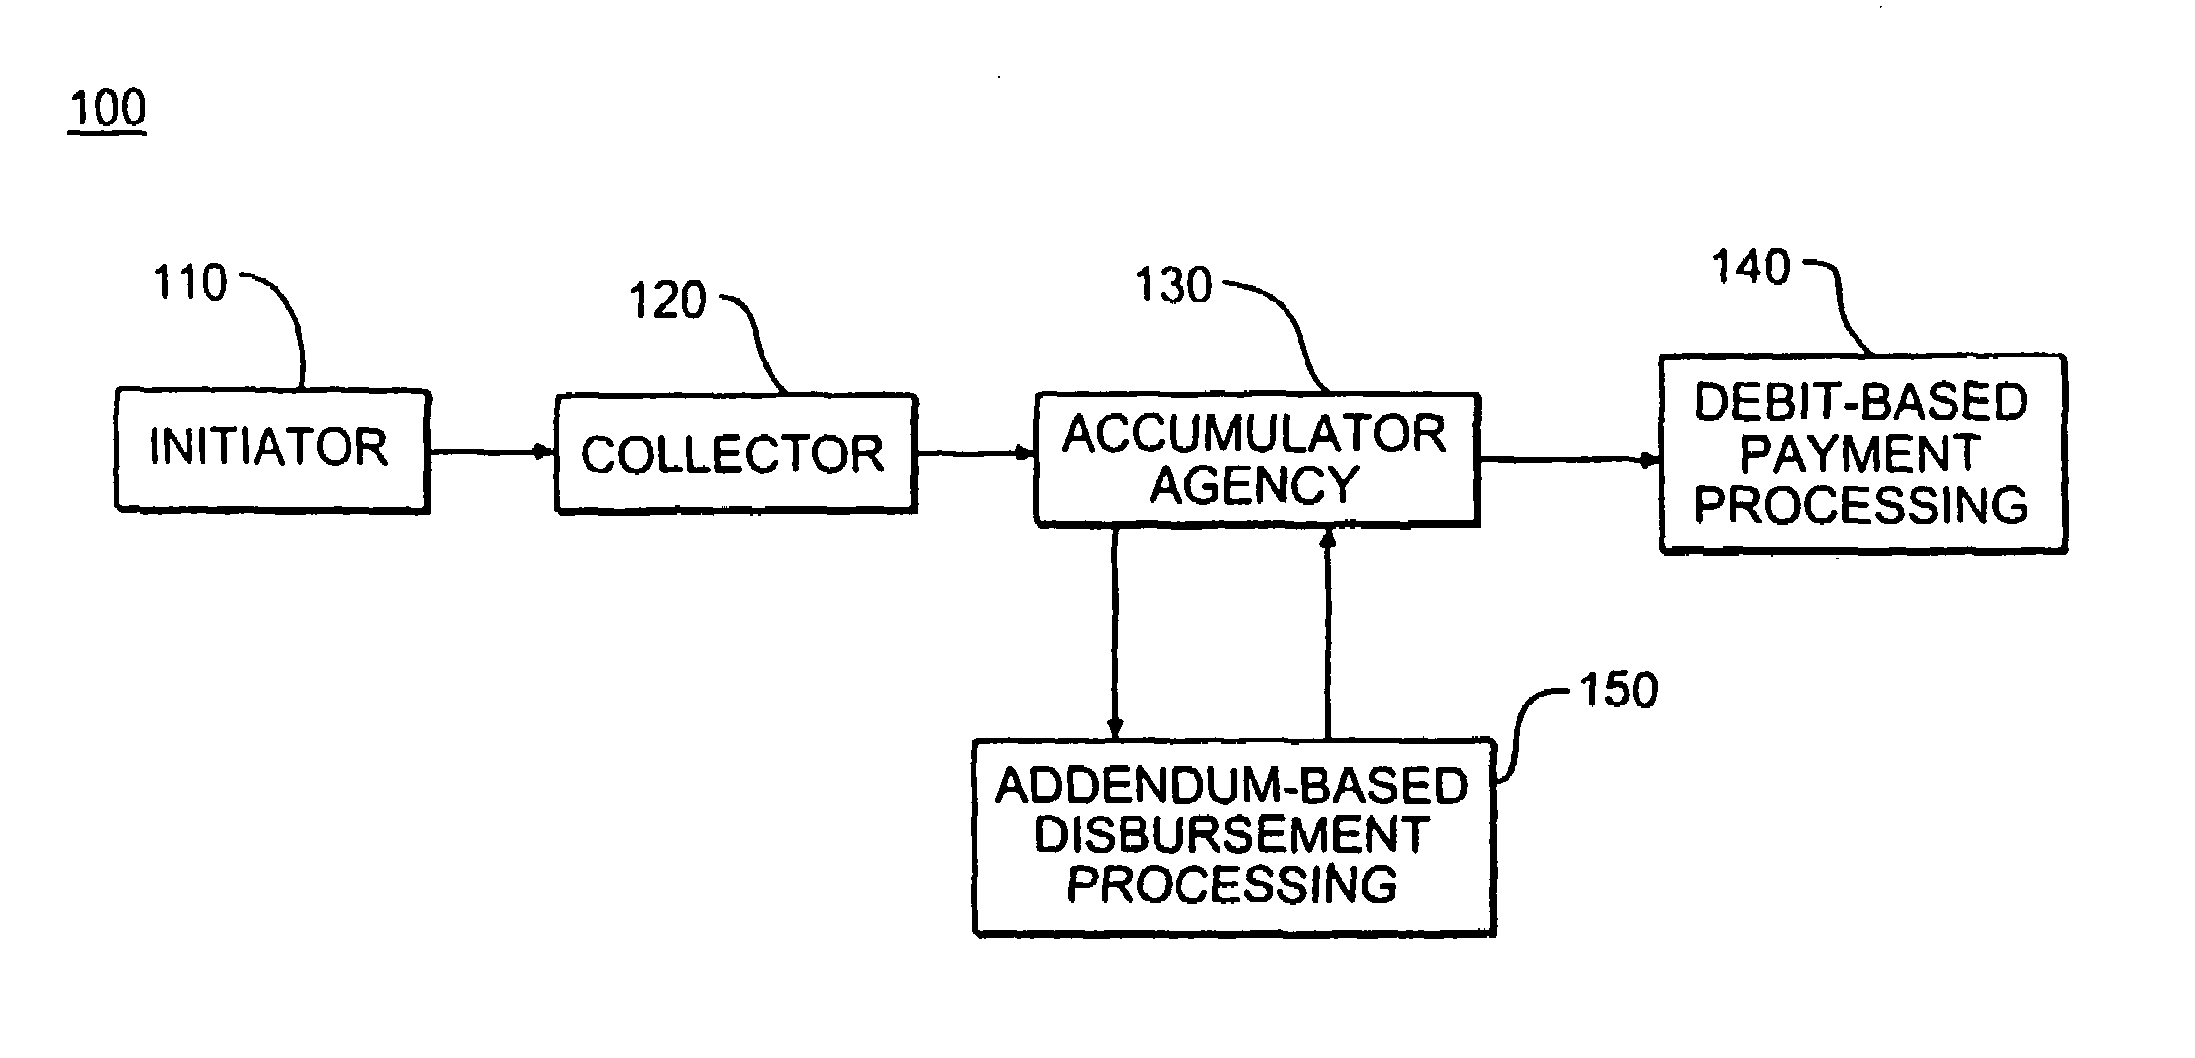 Method and apparatus for payment processing using debit-based electronic funds transfer and disbursement processing using addendum-based electronic data interchange